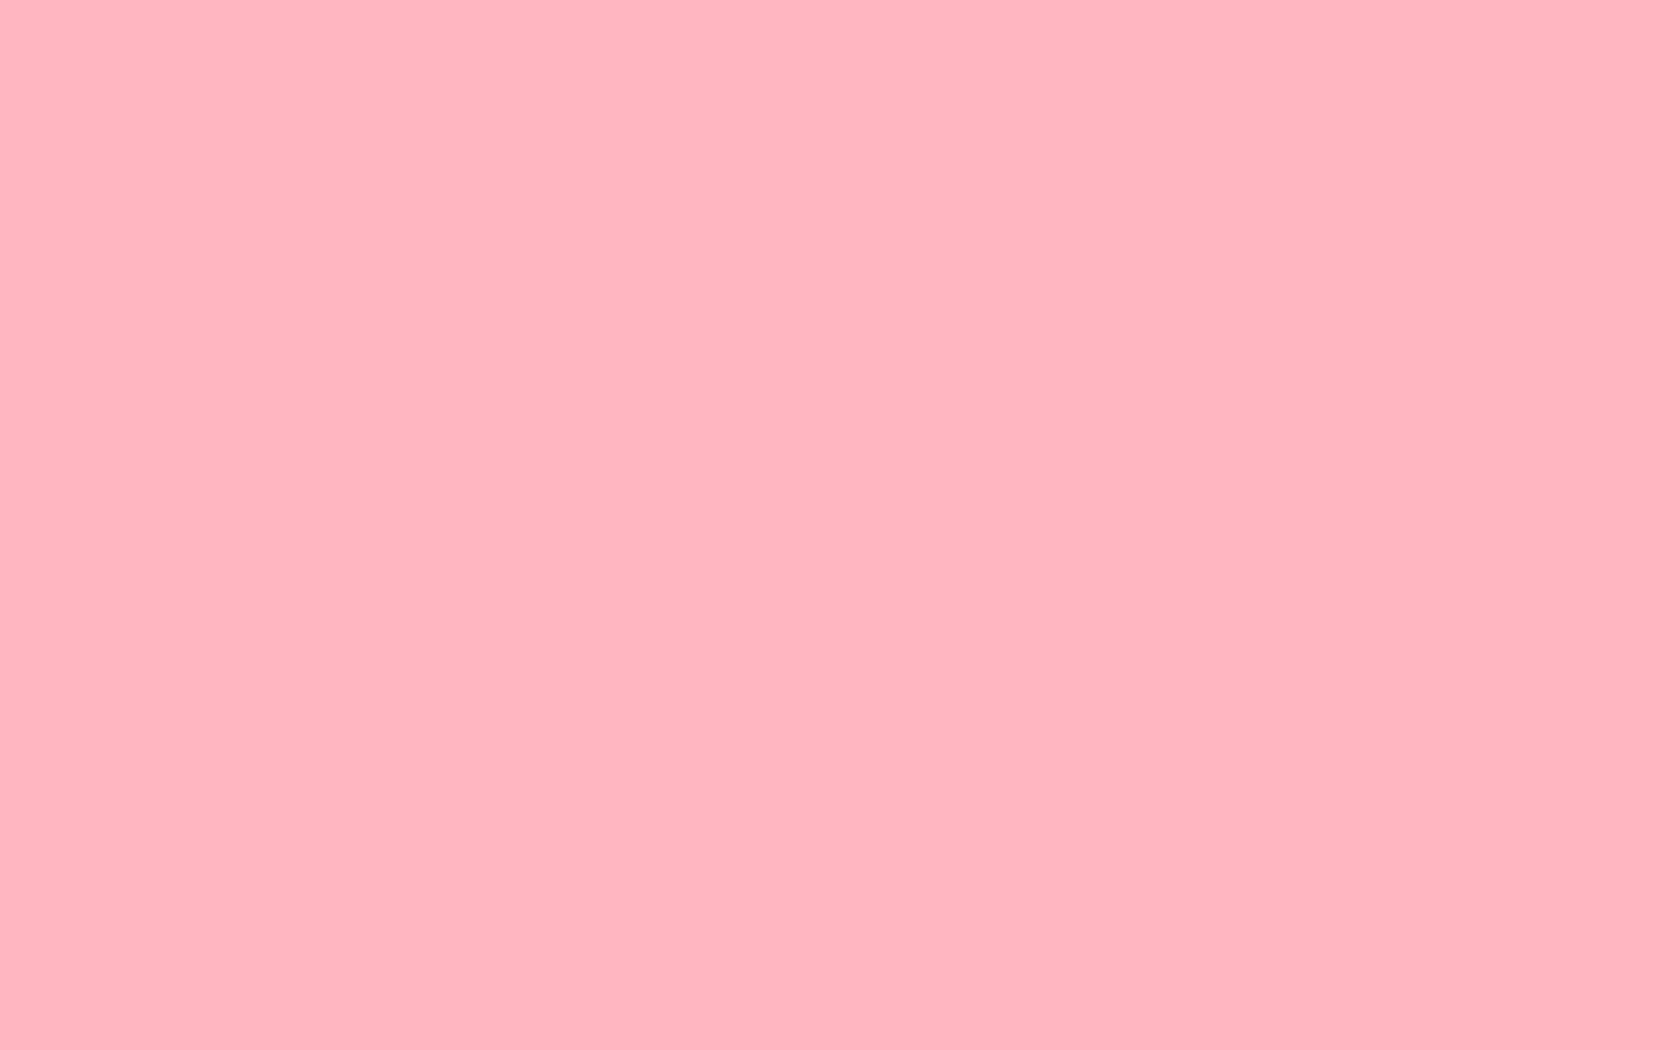  1680x1050 resolution Light Pink solid color background view and 1680x1050